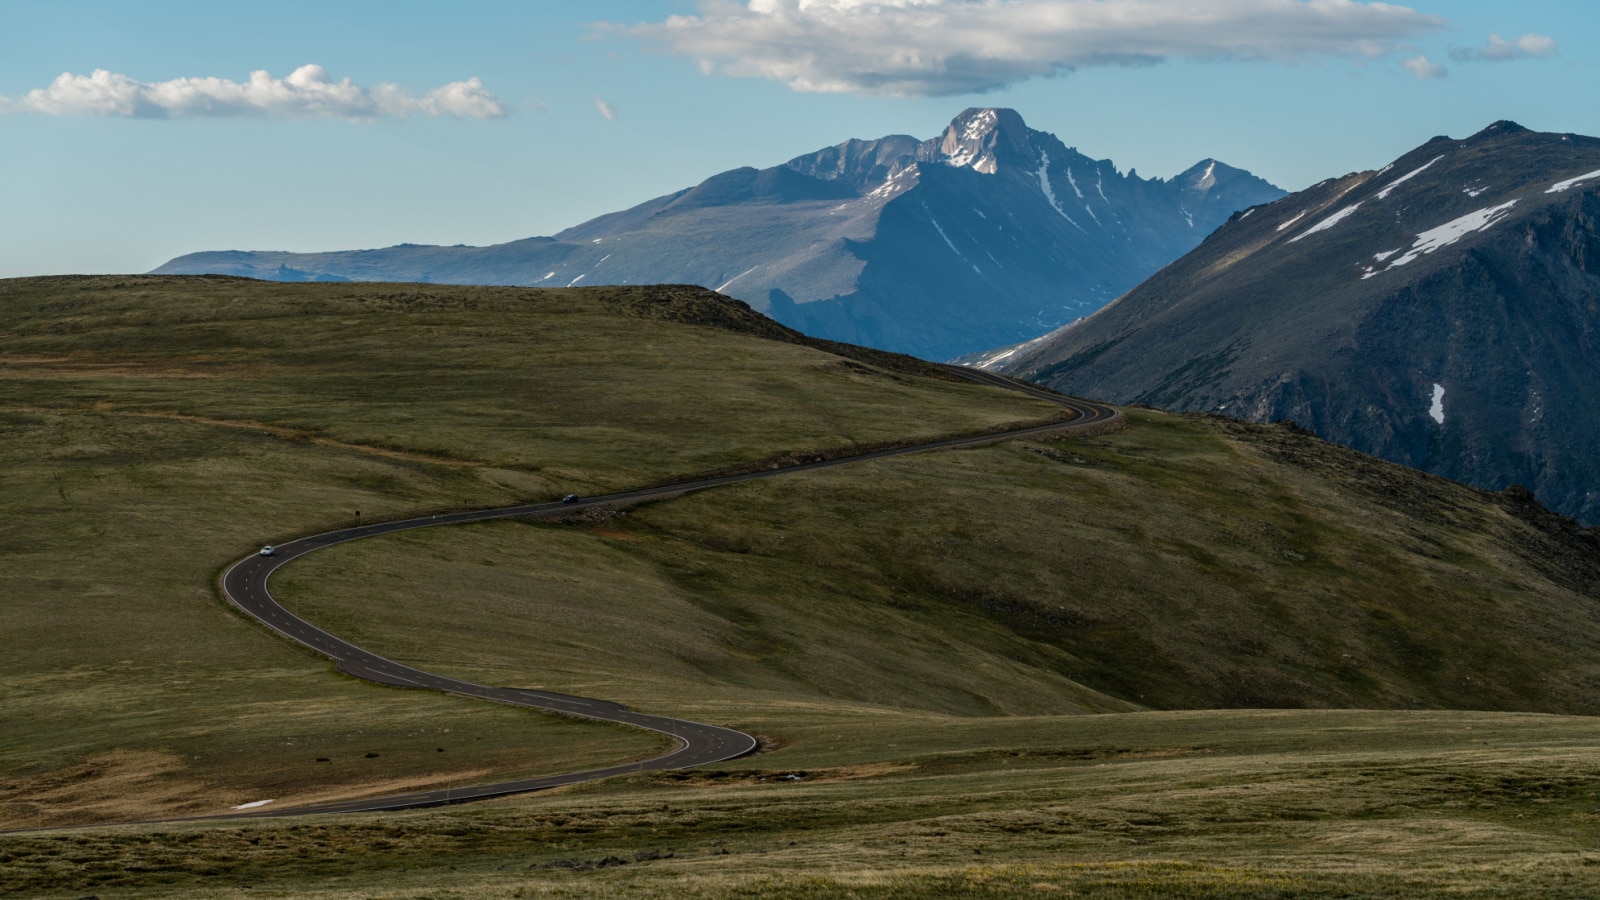 Trail Ridge Road, high in Colorado's Rocky Mountain National Park.